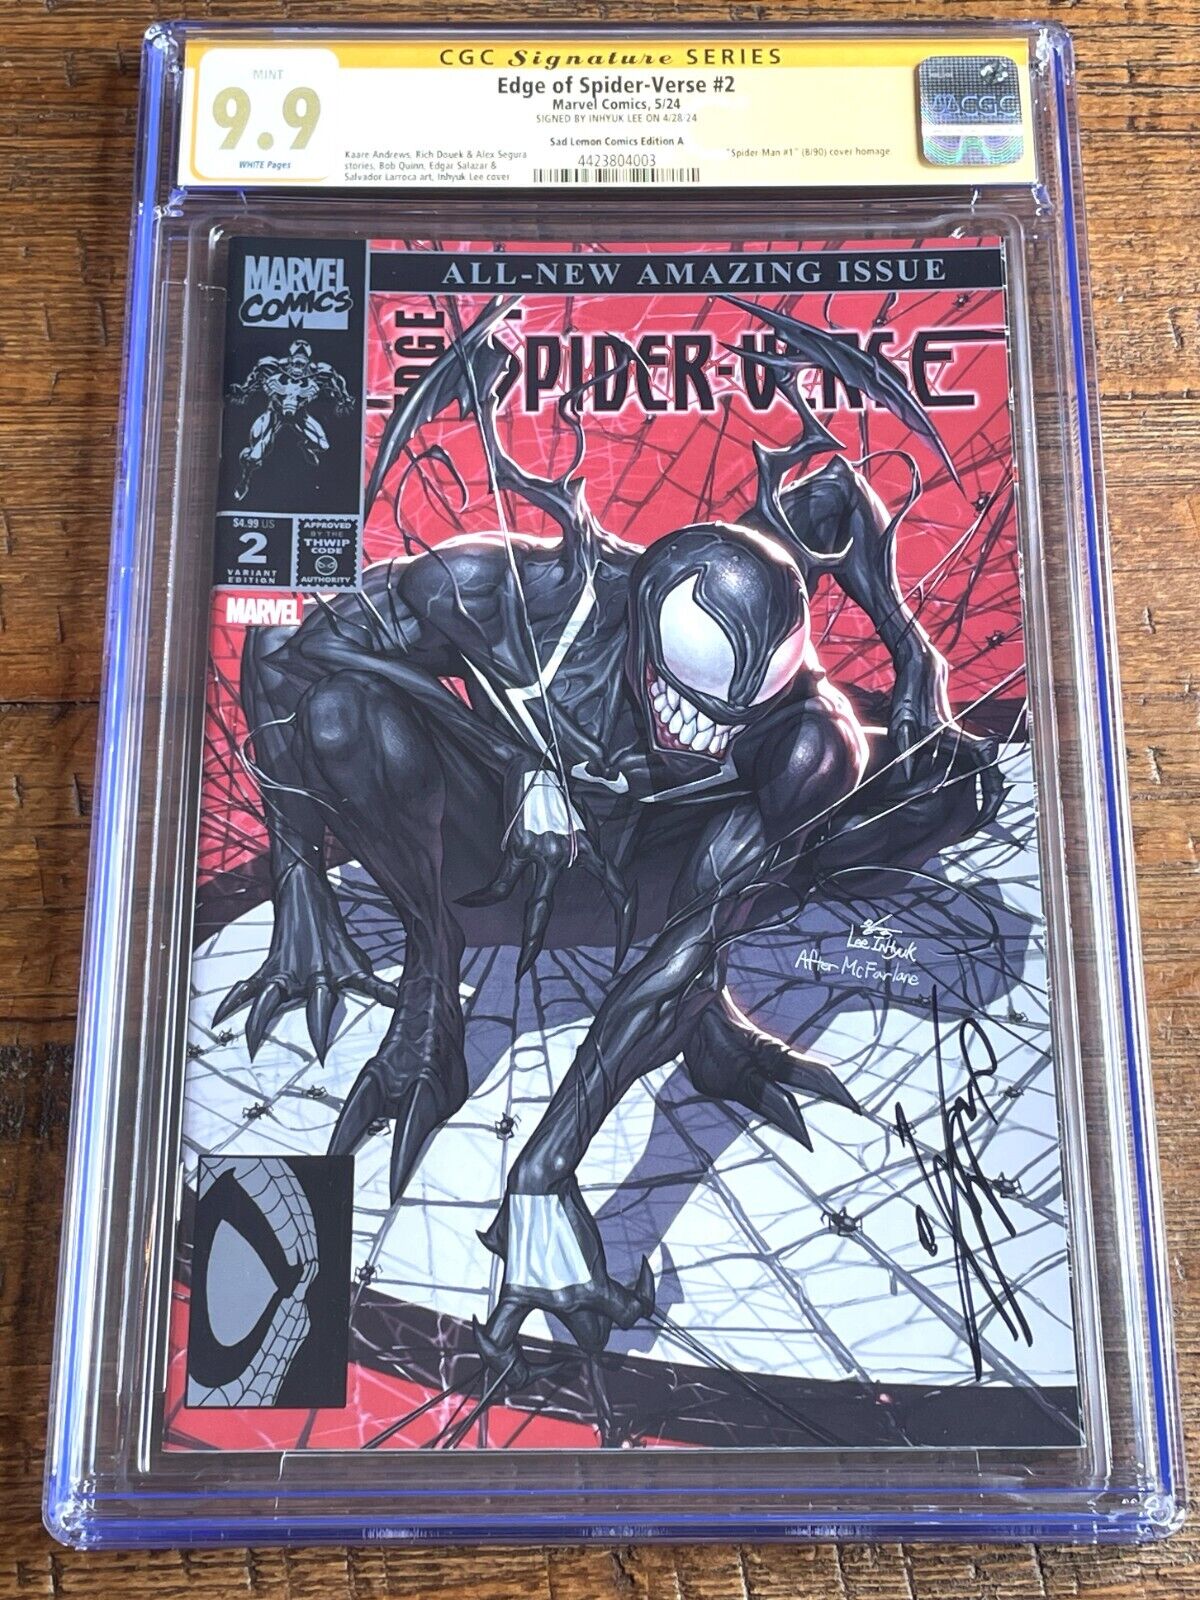 EDGE OF SPIDER-VERSE #2 CGC SS 9.9 INHYUK LEE SIGNED TRADE VARIANT NOT 9.8 WOW